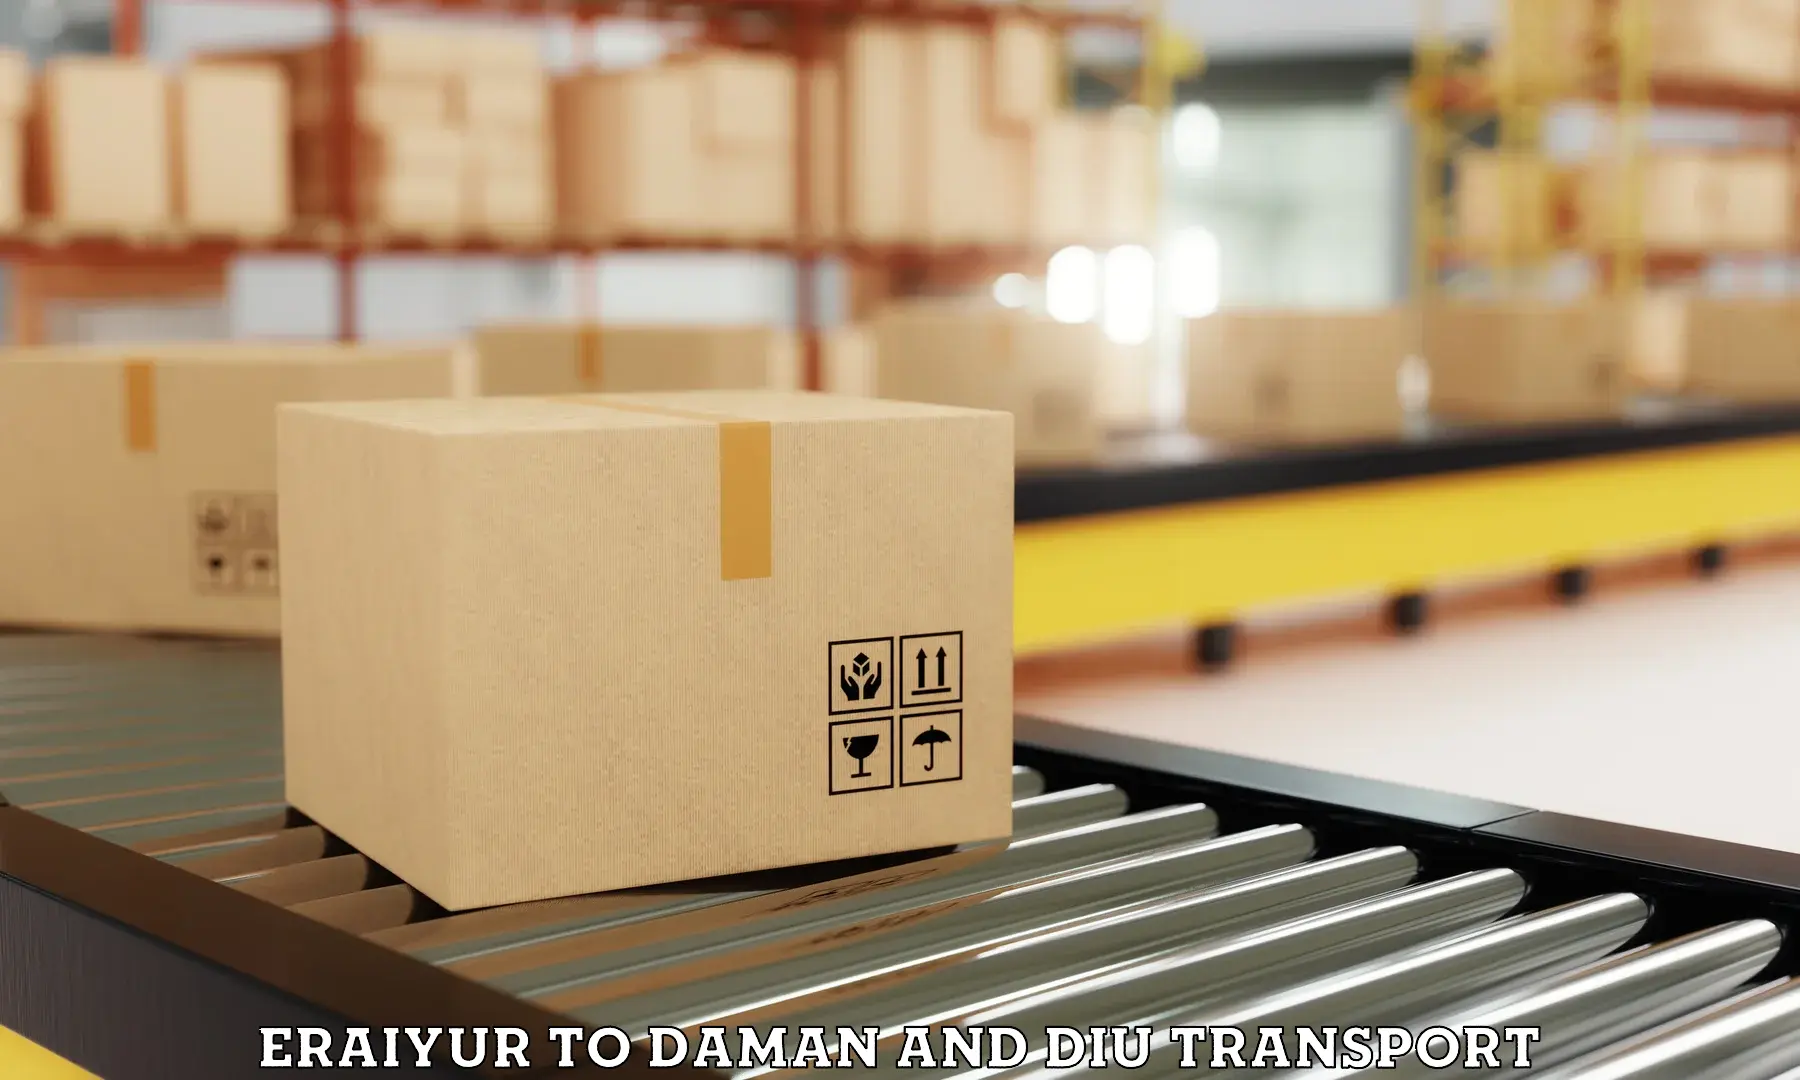 Goods delivery service Eraiyur to Daman and Diu